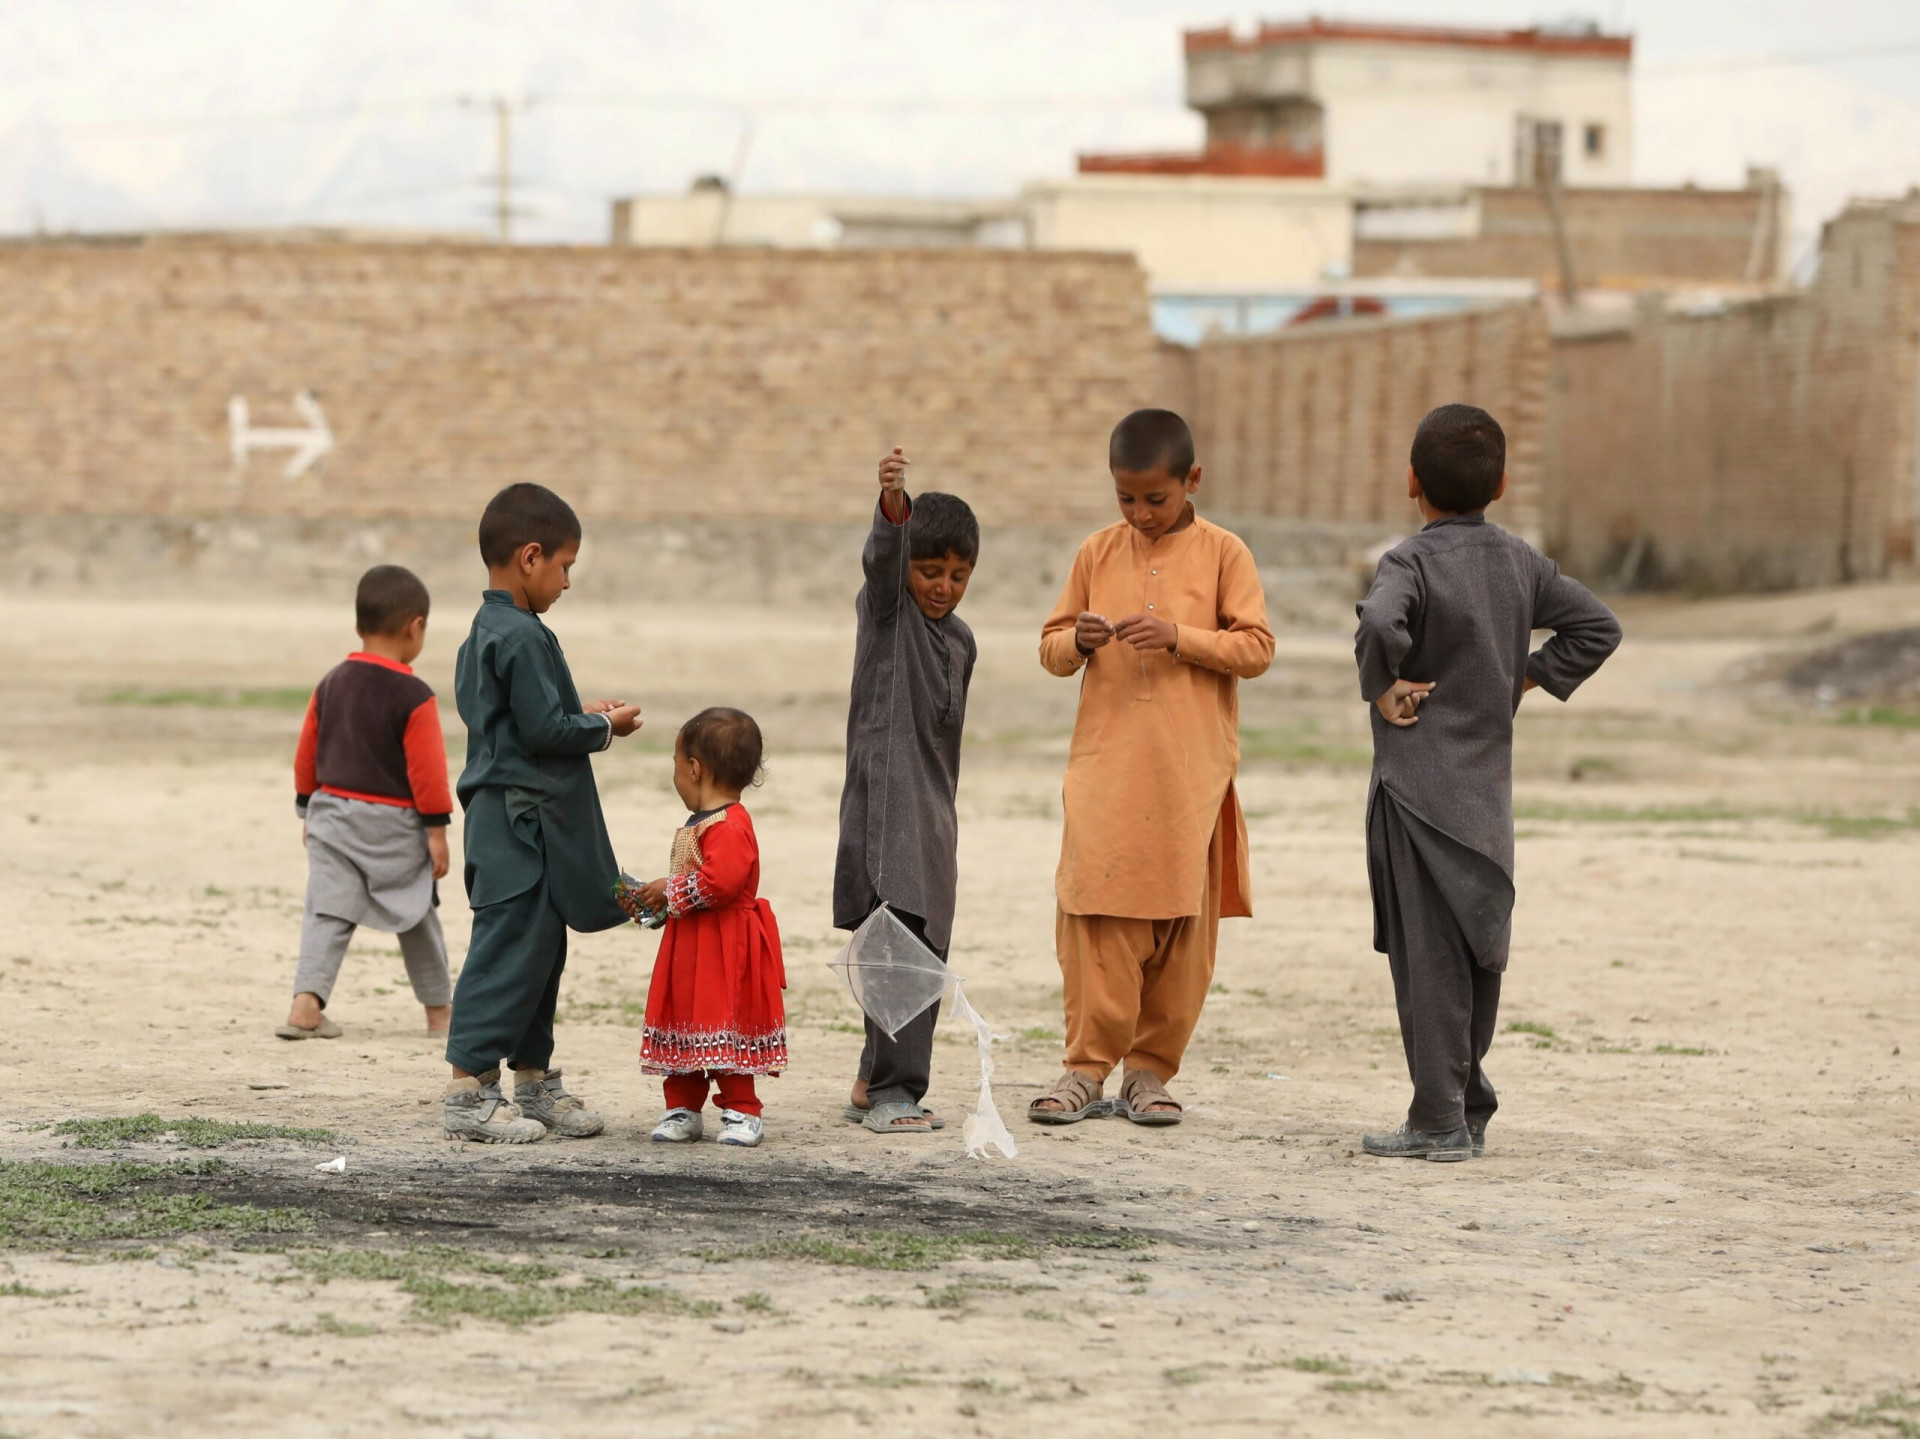 Kids playing in Afghanistan